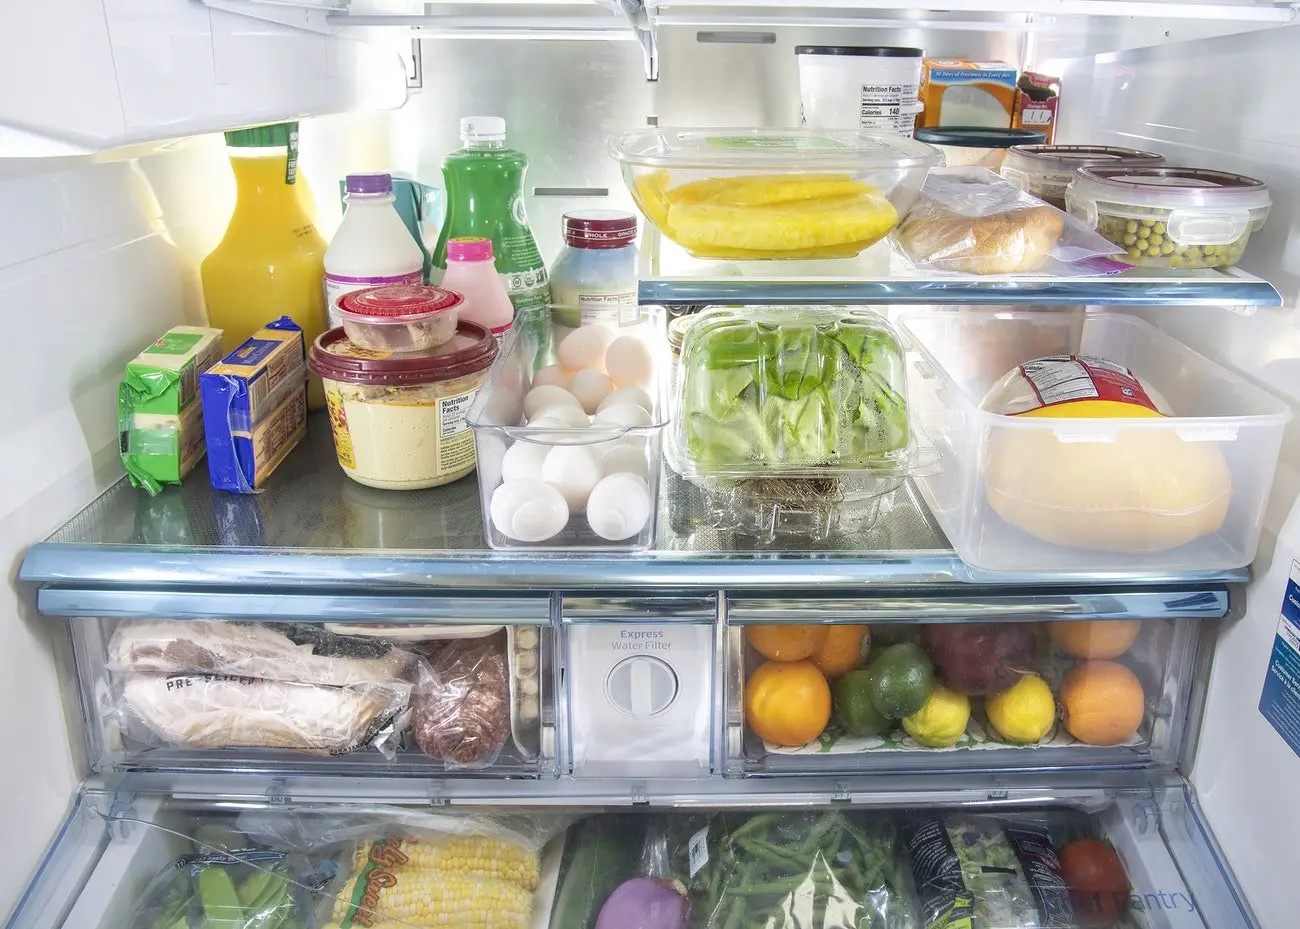 Refrigerator with well placed items